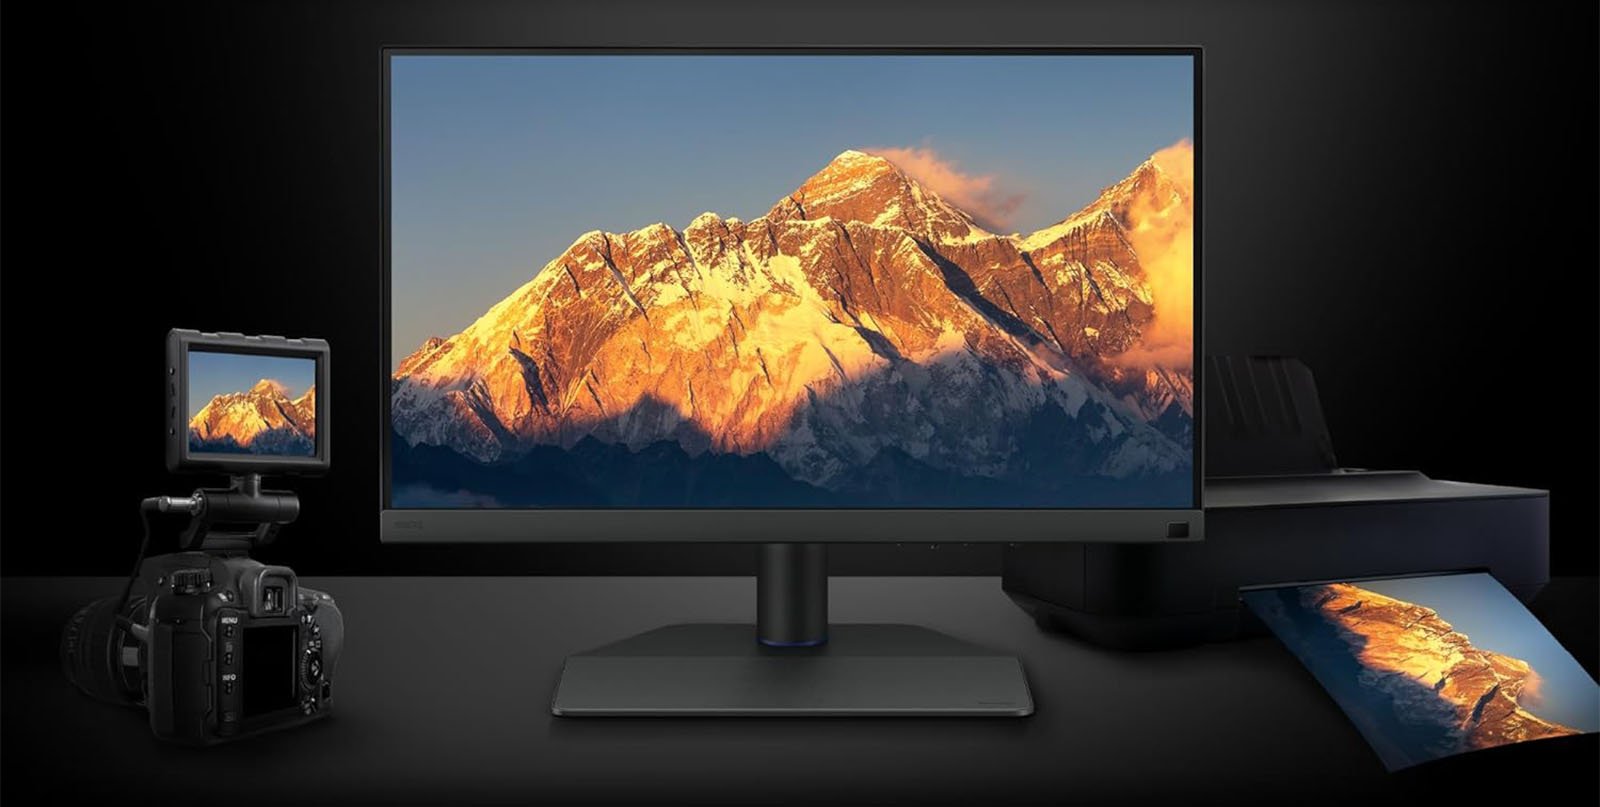 A desktop setup featuring a monitor displaying a mountain landscape, flanked by a dslr camera on the left and printed photographs on the right, all against a dark background.